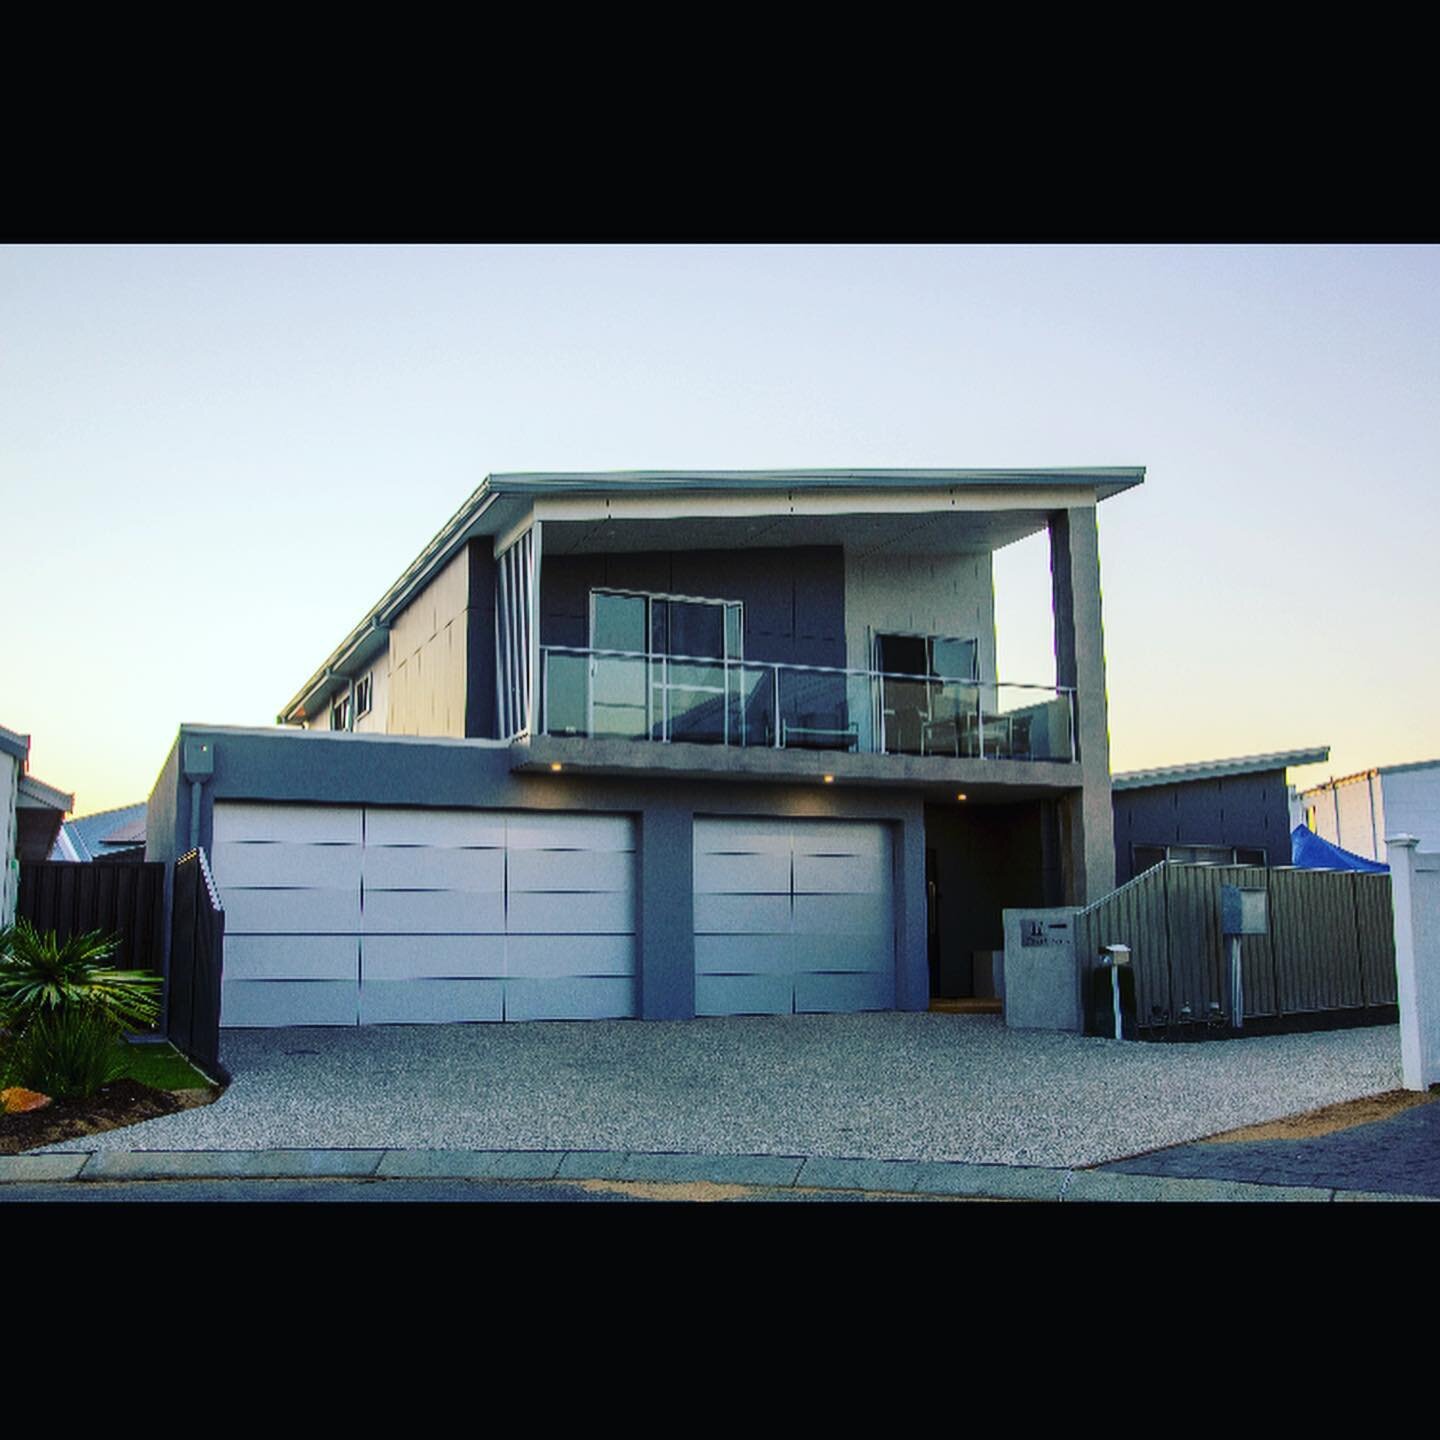 Our two story modern family home completed back in 2018! time flys. Still looking super fresh 🐩Took home &ldquo;Excellence in Concrete&rdquo; at this years MBA awards. well done again to All our trades! #polishedconcrete #timberframe #twostory #jame